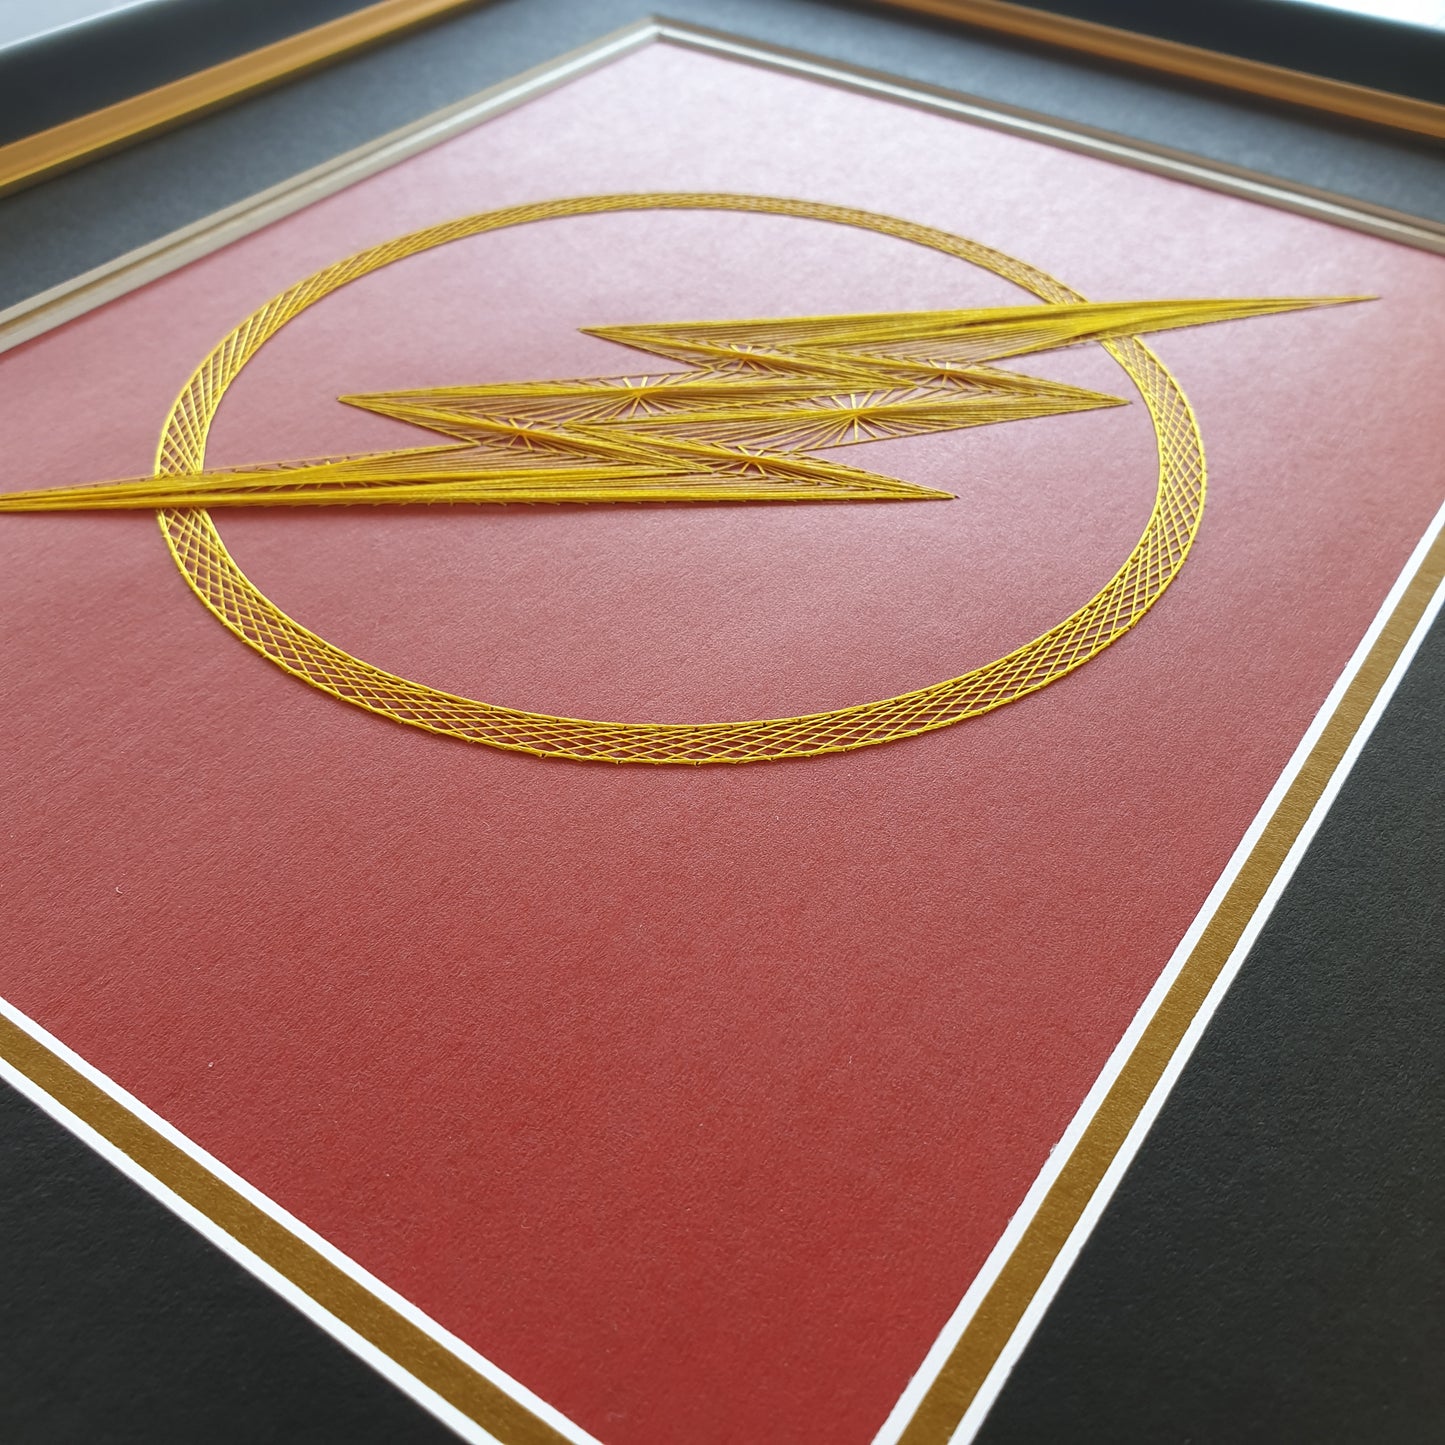 The Flash Inspired Card Embroidery Kit (Red Card)